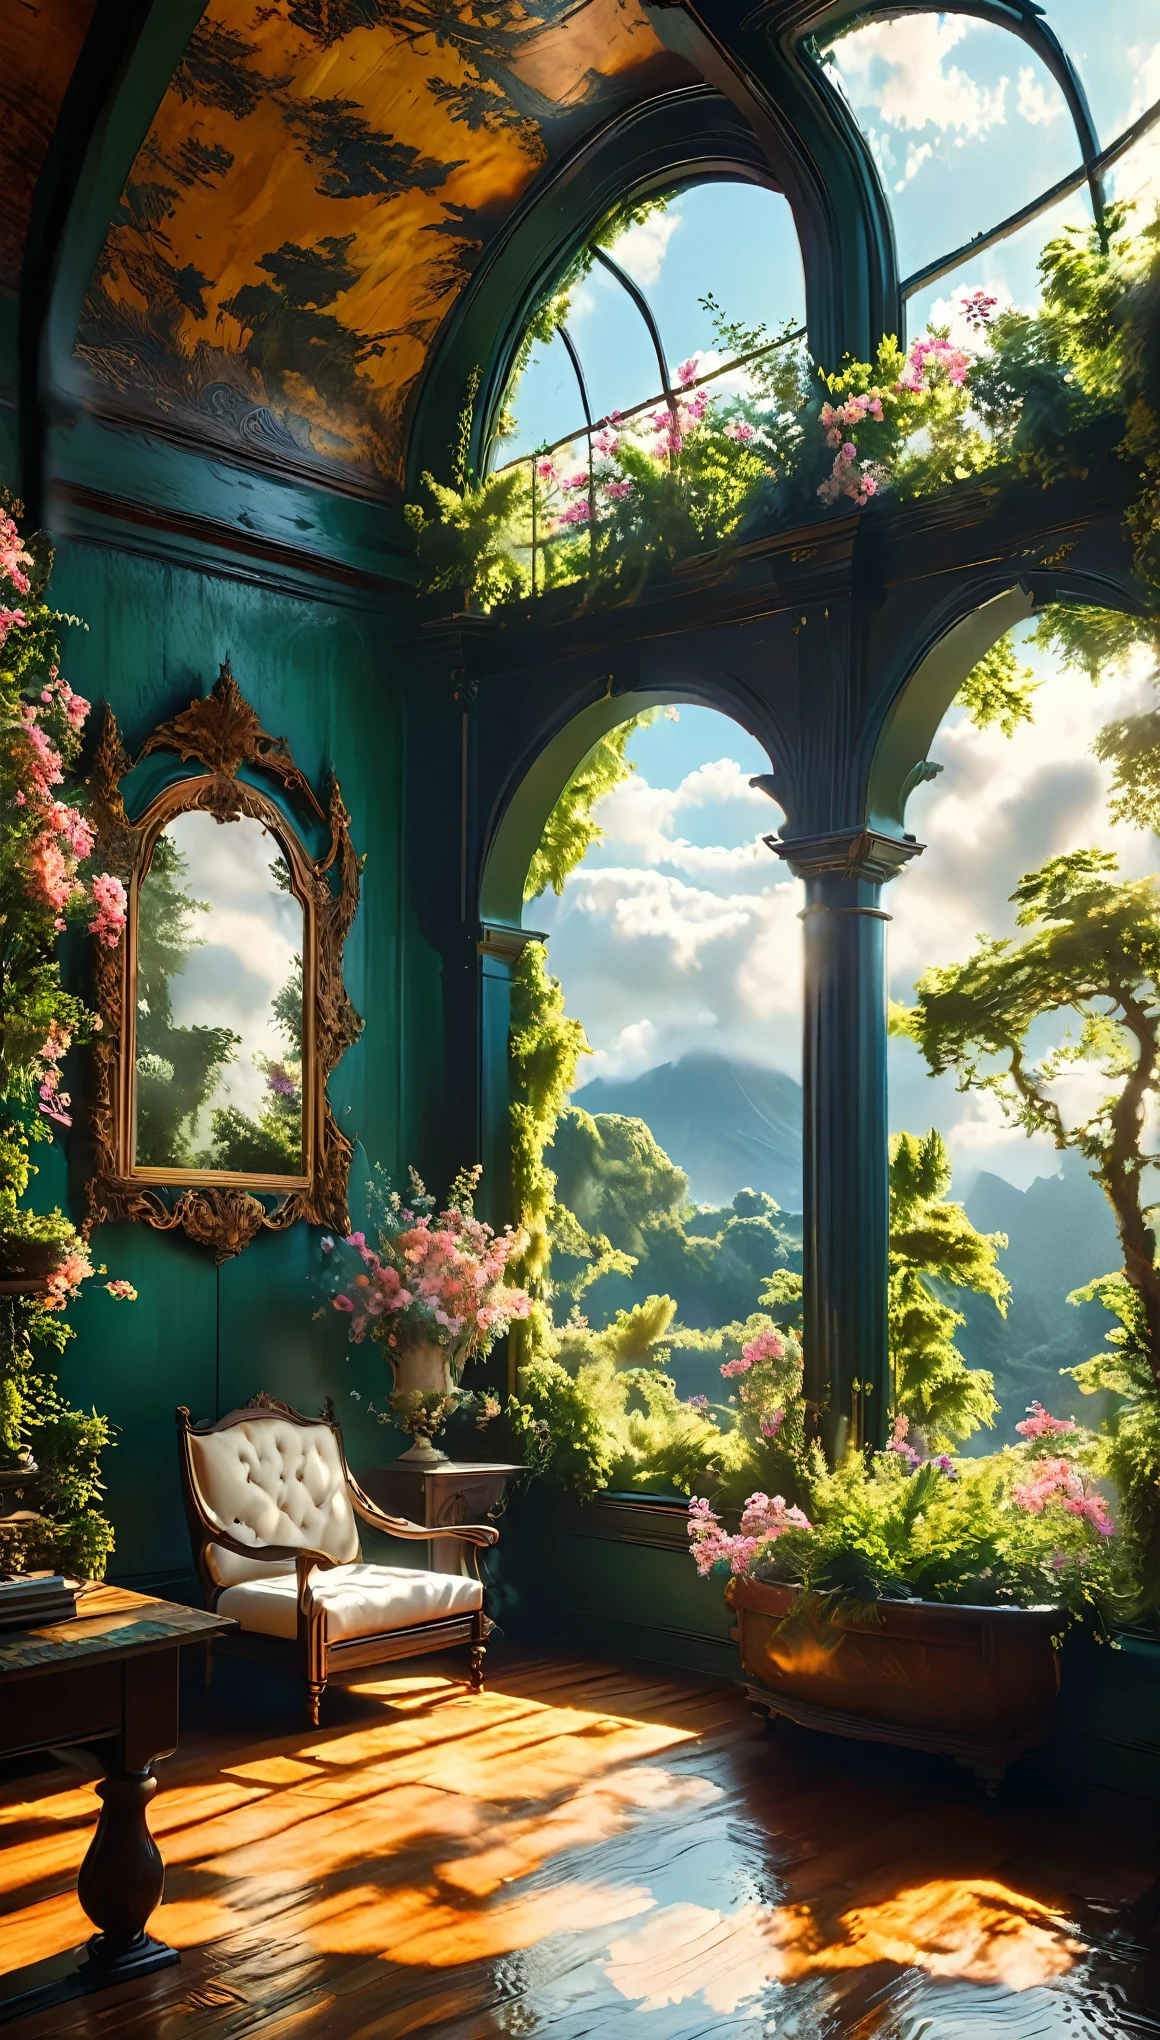 Create a serene scene of a cozy room with a large window offering an extra cloudy view of a paradise, rendered in highly detailed digital art with 4K and 8K resolutions, using Octane and inspired by the style of Romanticism. This concept art should be a masterpiece of official illustration, merging realism and divine elements to achieve the highest quality.

The room features warm, wooden interiors with plush furniture, creating a cozy and inviting atmosphere. A large, arched window dominates one wall, framed by elegant drapes that are gently swaying in the breeze. Through the window, an ethereal, cloud-filled paradise is visible, bathed in soft, golden light.

Outside, the landscape is a breathtaking expanse of rolling hills covered in lush, vibrant greenery and dotted with radiant, blooming flowers. The sky is filled with thick, fluffy clouds, their edges glowing with a divine light. The clouds move lazily, creating ever-changing patterns of light and shadow over the paradise.

In the foreground, a tranquil pond reflects the celestial light, surrounded by delicate, glowing plants and ancient, majestic trees. Ethereal creatures, both real and fantastical, move gracefully through the garden, adding a sense of wonder and tranquility.

The composition captures the cozy interior of the room and the breathtaking view of the cloud-filled paradise outside. The rendering by Octane highlights the textures of the wooden interiors, plush furniture, and celestial light, creating a scene of stunning realism and fantasy.

Every element, from the intricate carvings of the furniture to the radiant flowers outside, is meticulously crafted to create a vivid and immersive experience. This digital artwork embodies the serene imagination and perfect composition envisioned by artists like Caspar David Friedrich and J.M.W. Turner, making it a true masterpiece.